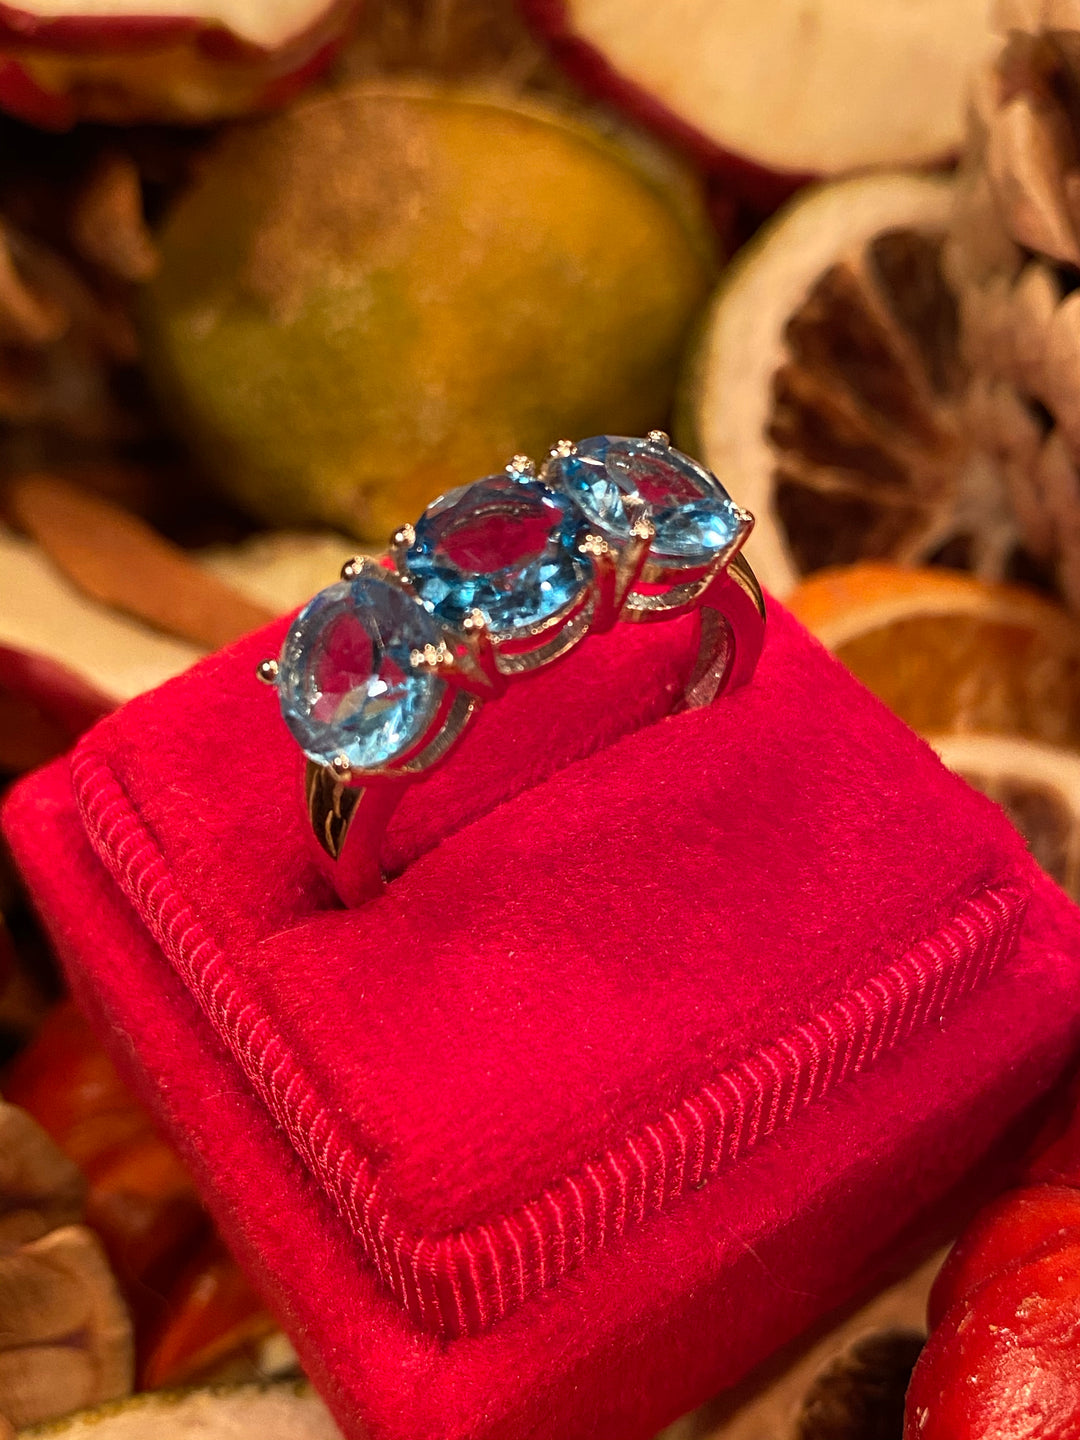 Blue Topaz Three Stone Ring in Sterling Silver